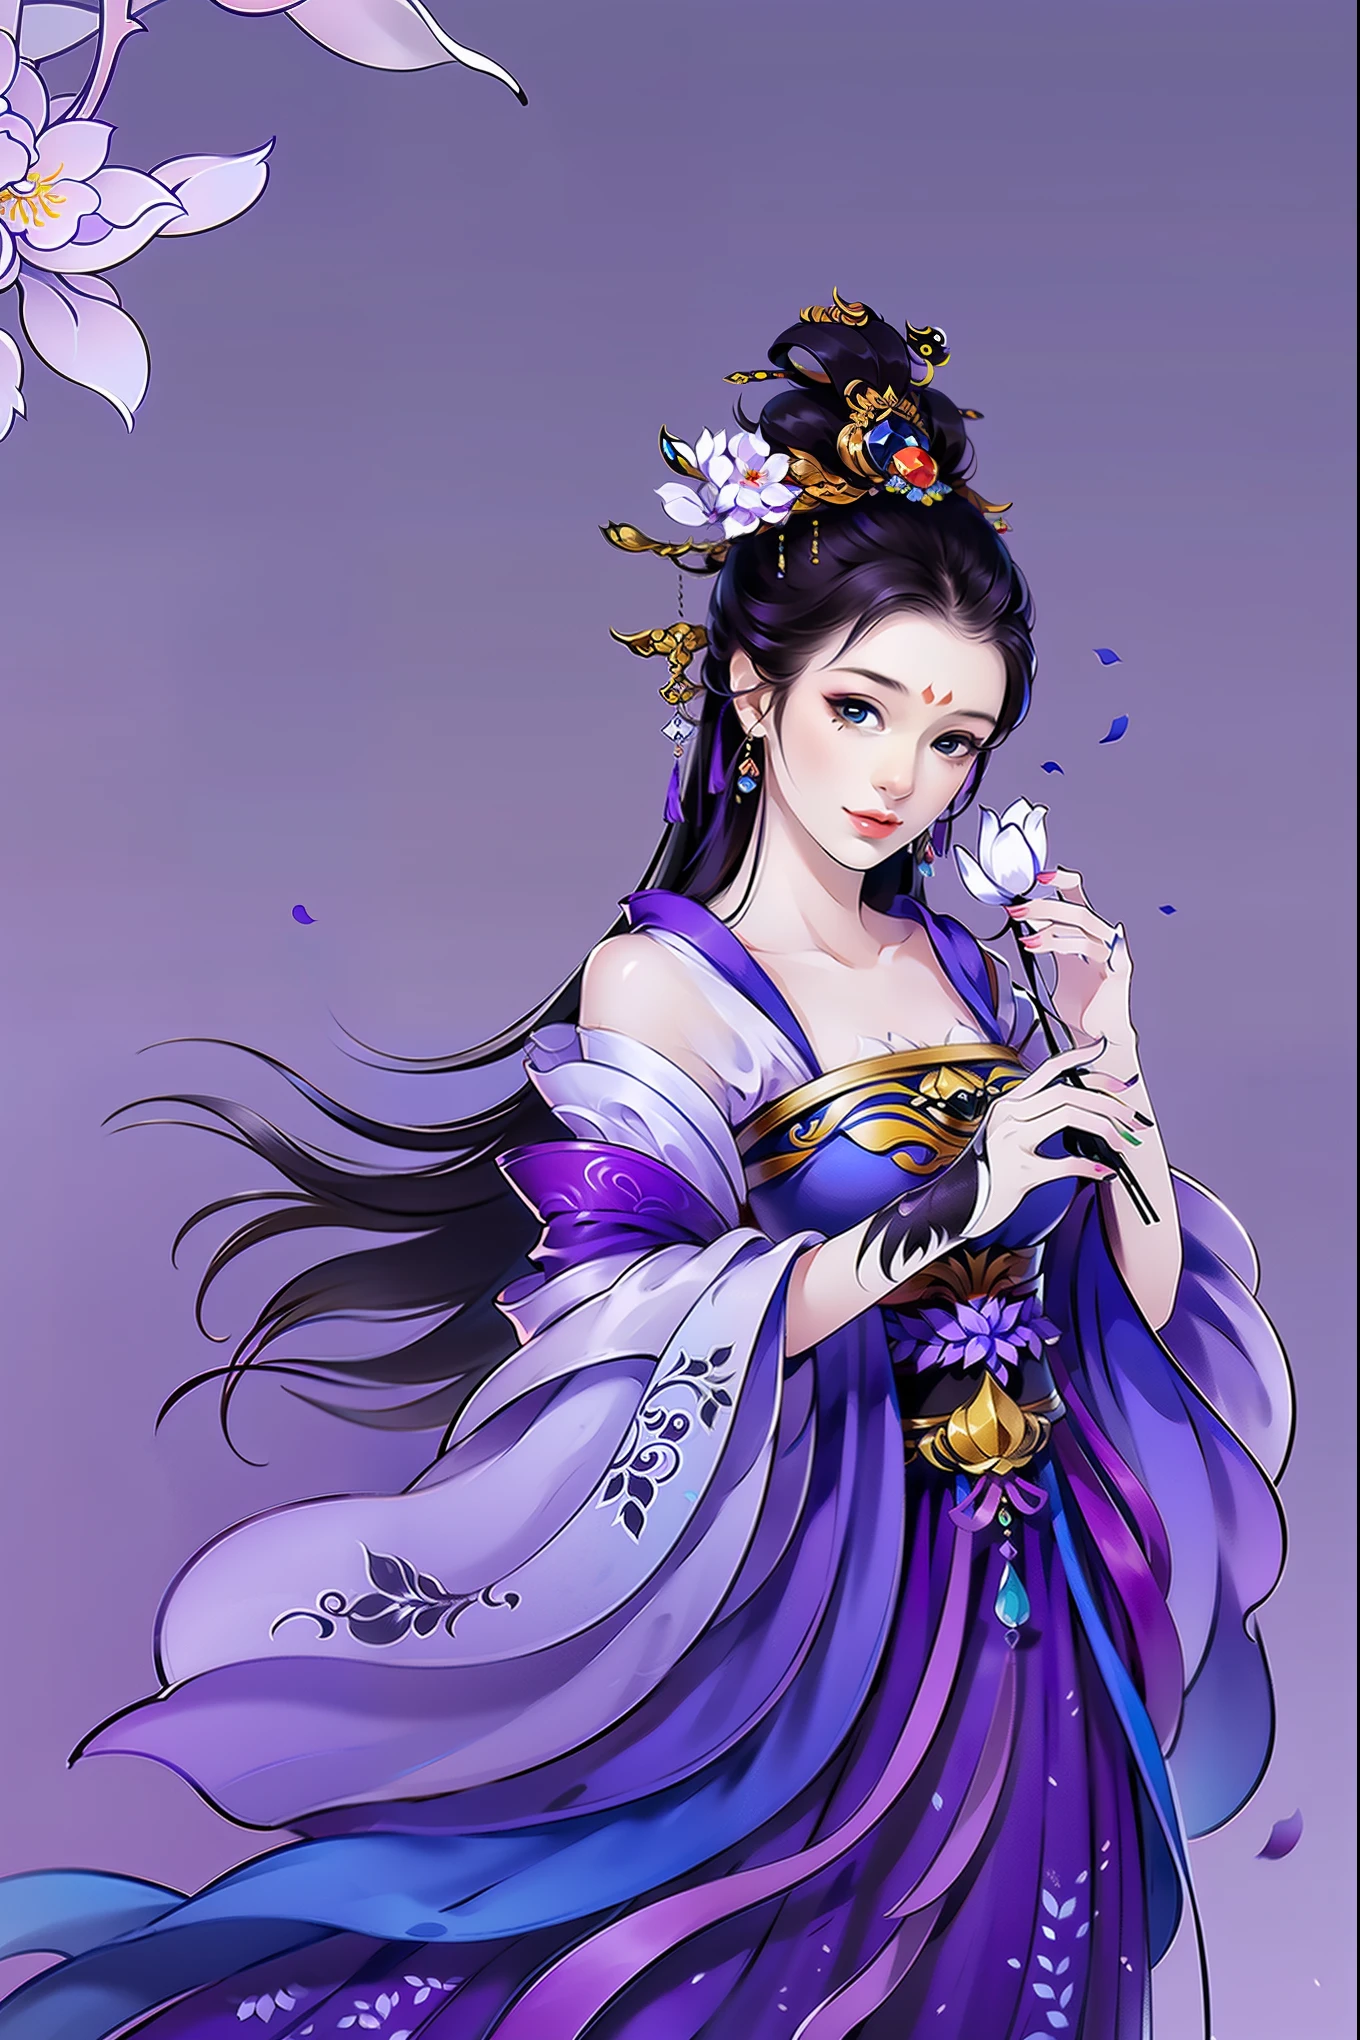 （masterpiece，super detailed，HD details，highly detailed art）1 girl，Half body，xianxia，monochrome，purple dress，Wisteria flowers，elegant，Highly detailed character designs from East Asia，Game character costume design，simple，ultra high resolution, sharp focus, epic work, masterpiece, (Very detailed CG unified 8k wallpaper)，pretty face，beautiful eyes，HD details